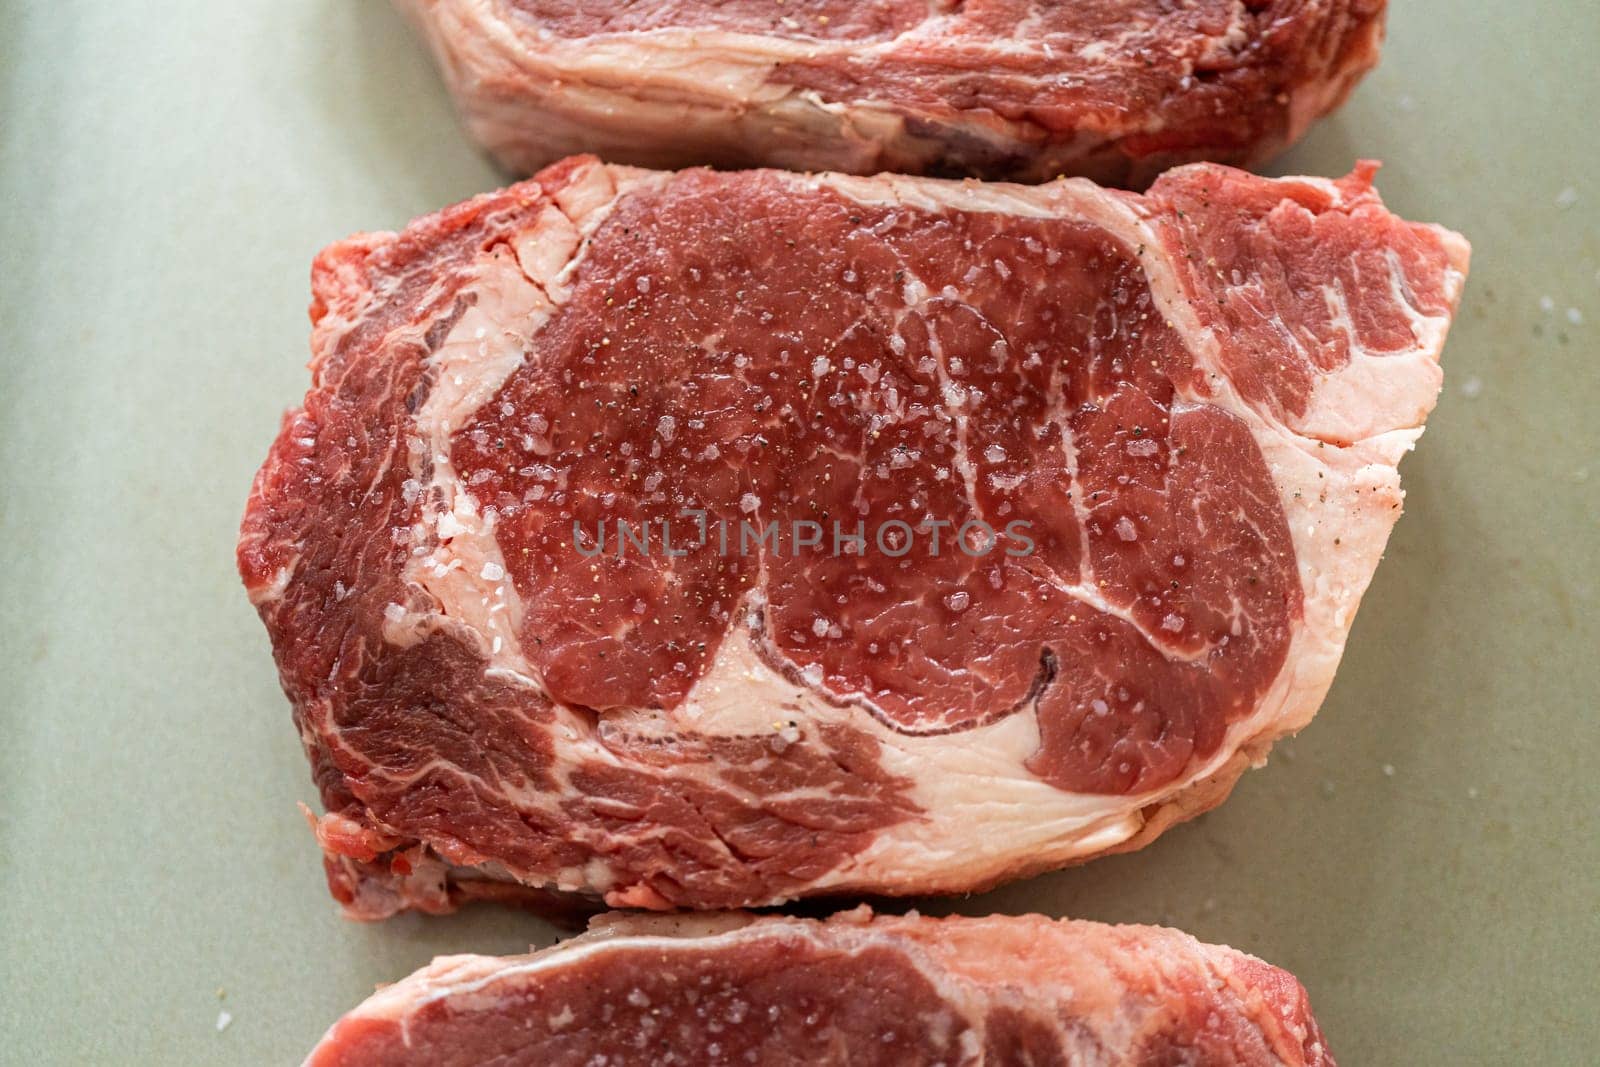 Situated in a modern white kitchen, a seasoned rib eye steak, boasting its beautiful marbling, sits ready on a baking sheet. It is prepared for the outdoor gas grill, promising a perfect sear on the exterior and a juicy, tender interior, heralding an upcoming indulgent feast.